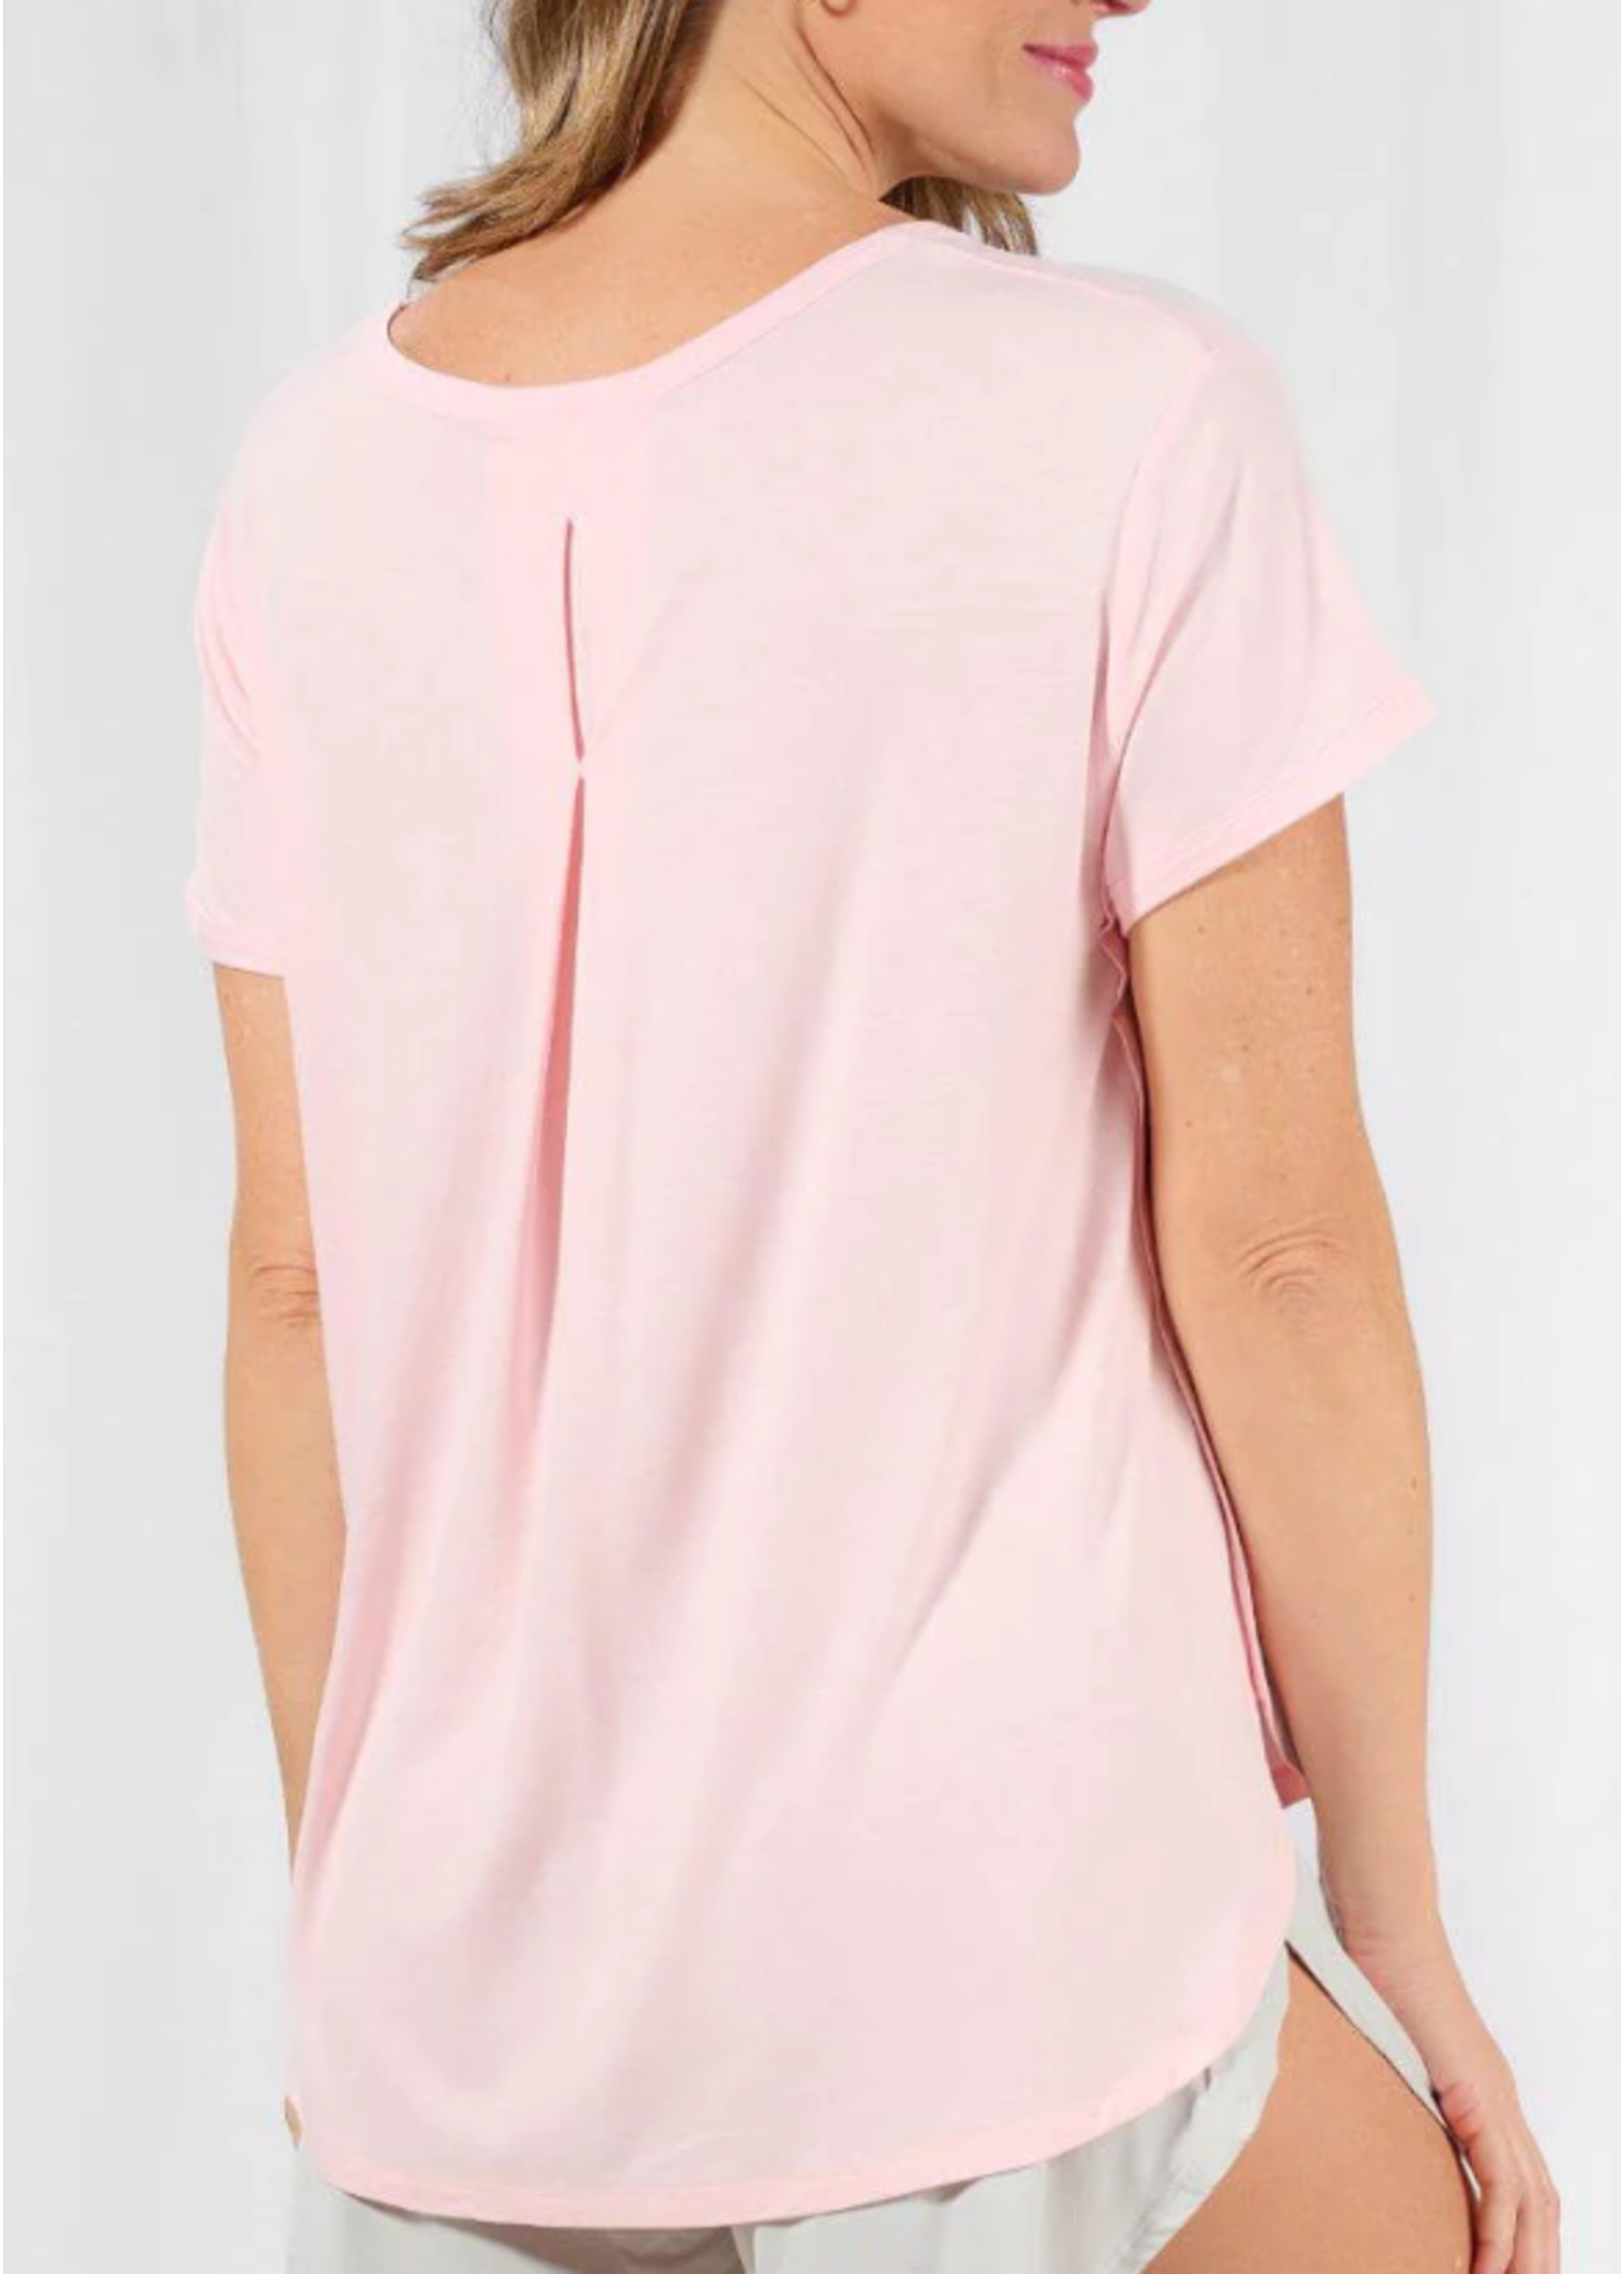 Face Plant Dreams FPD Bamboo Tulip Tee Blush Pink large